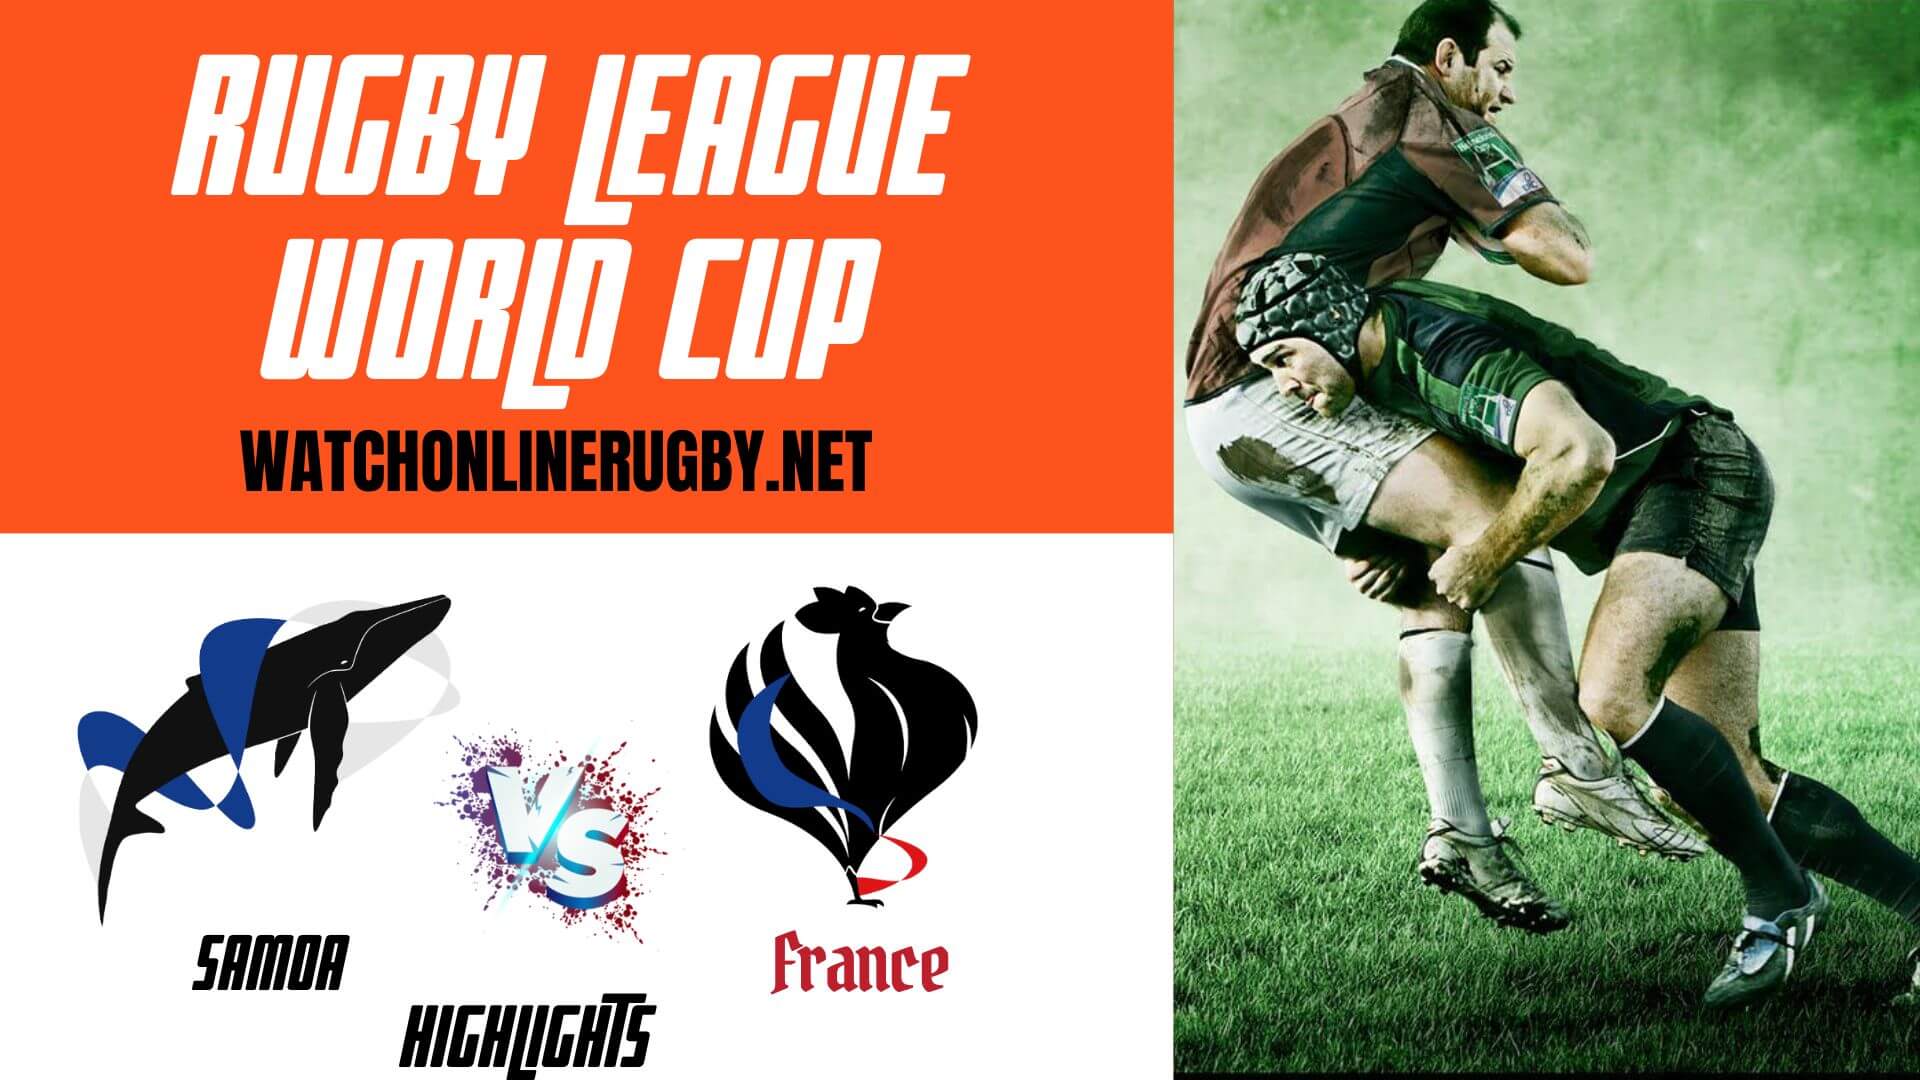 Samoa Vs France Rugby League World Cup 2022 RD 3